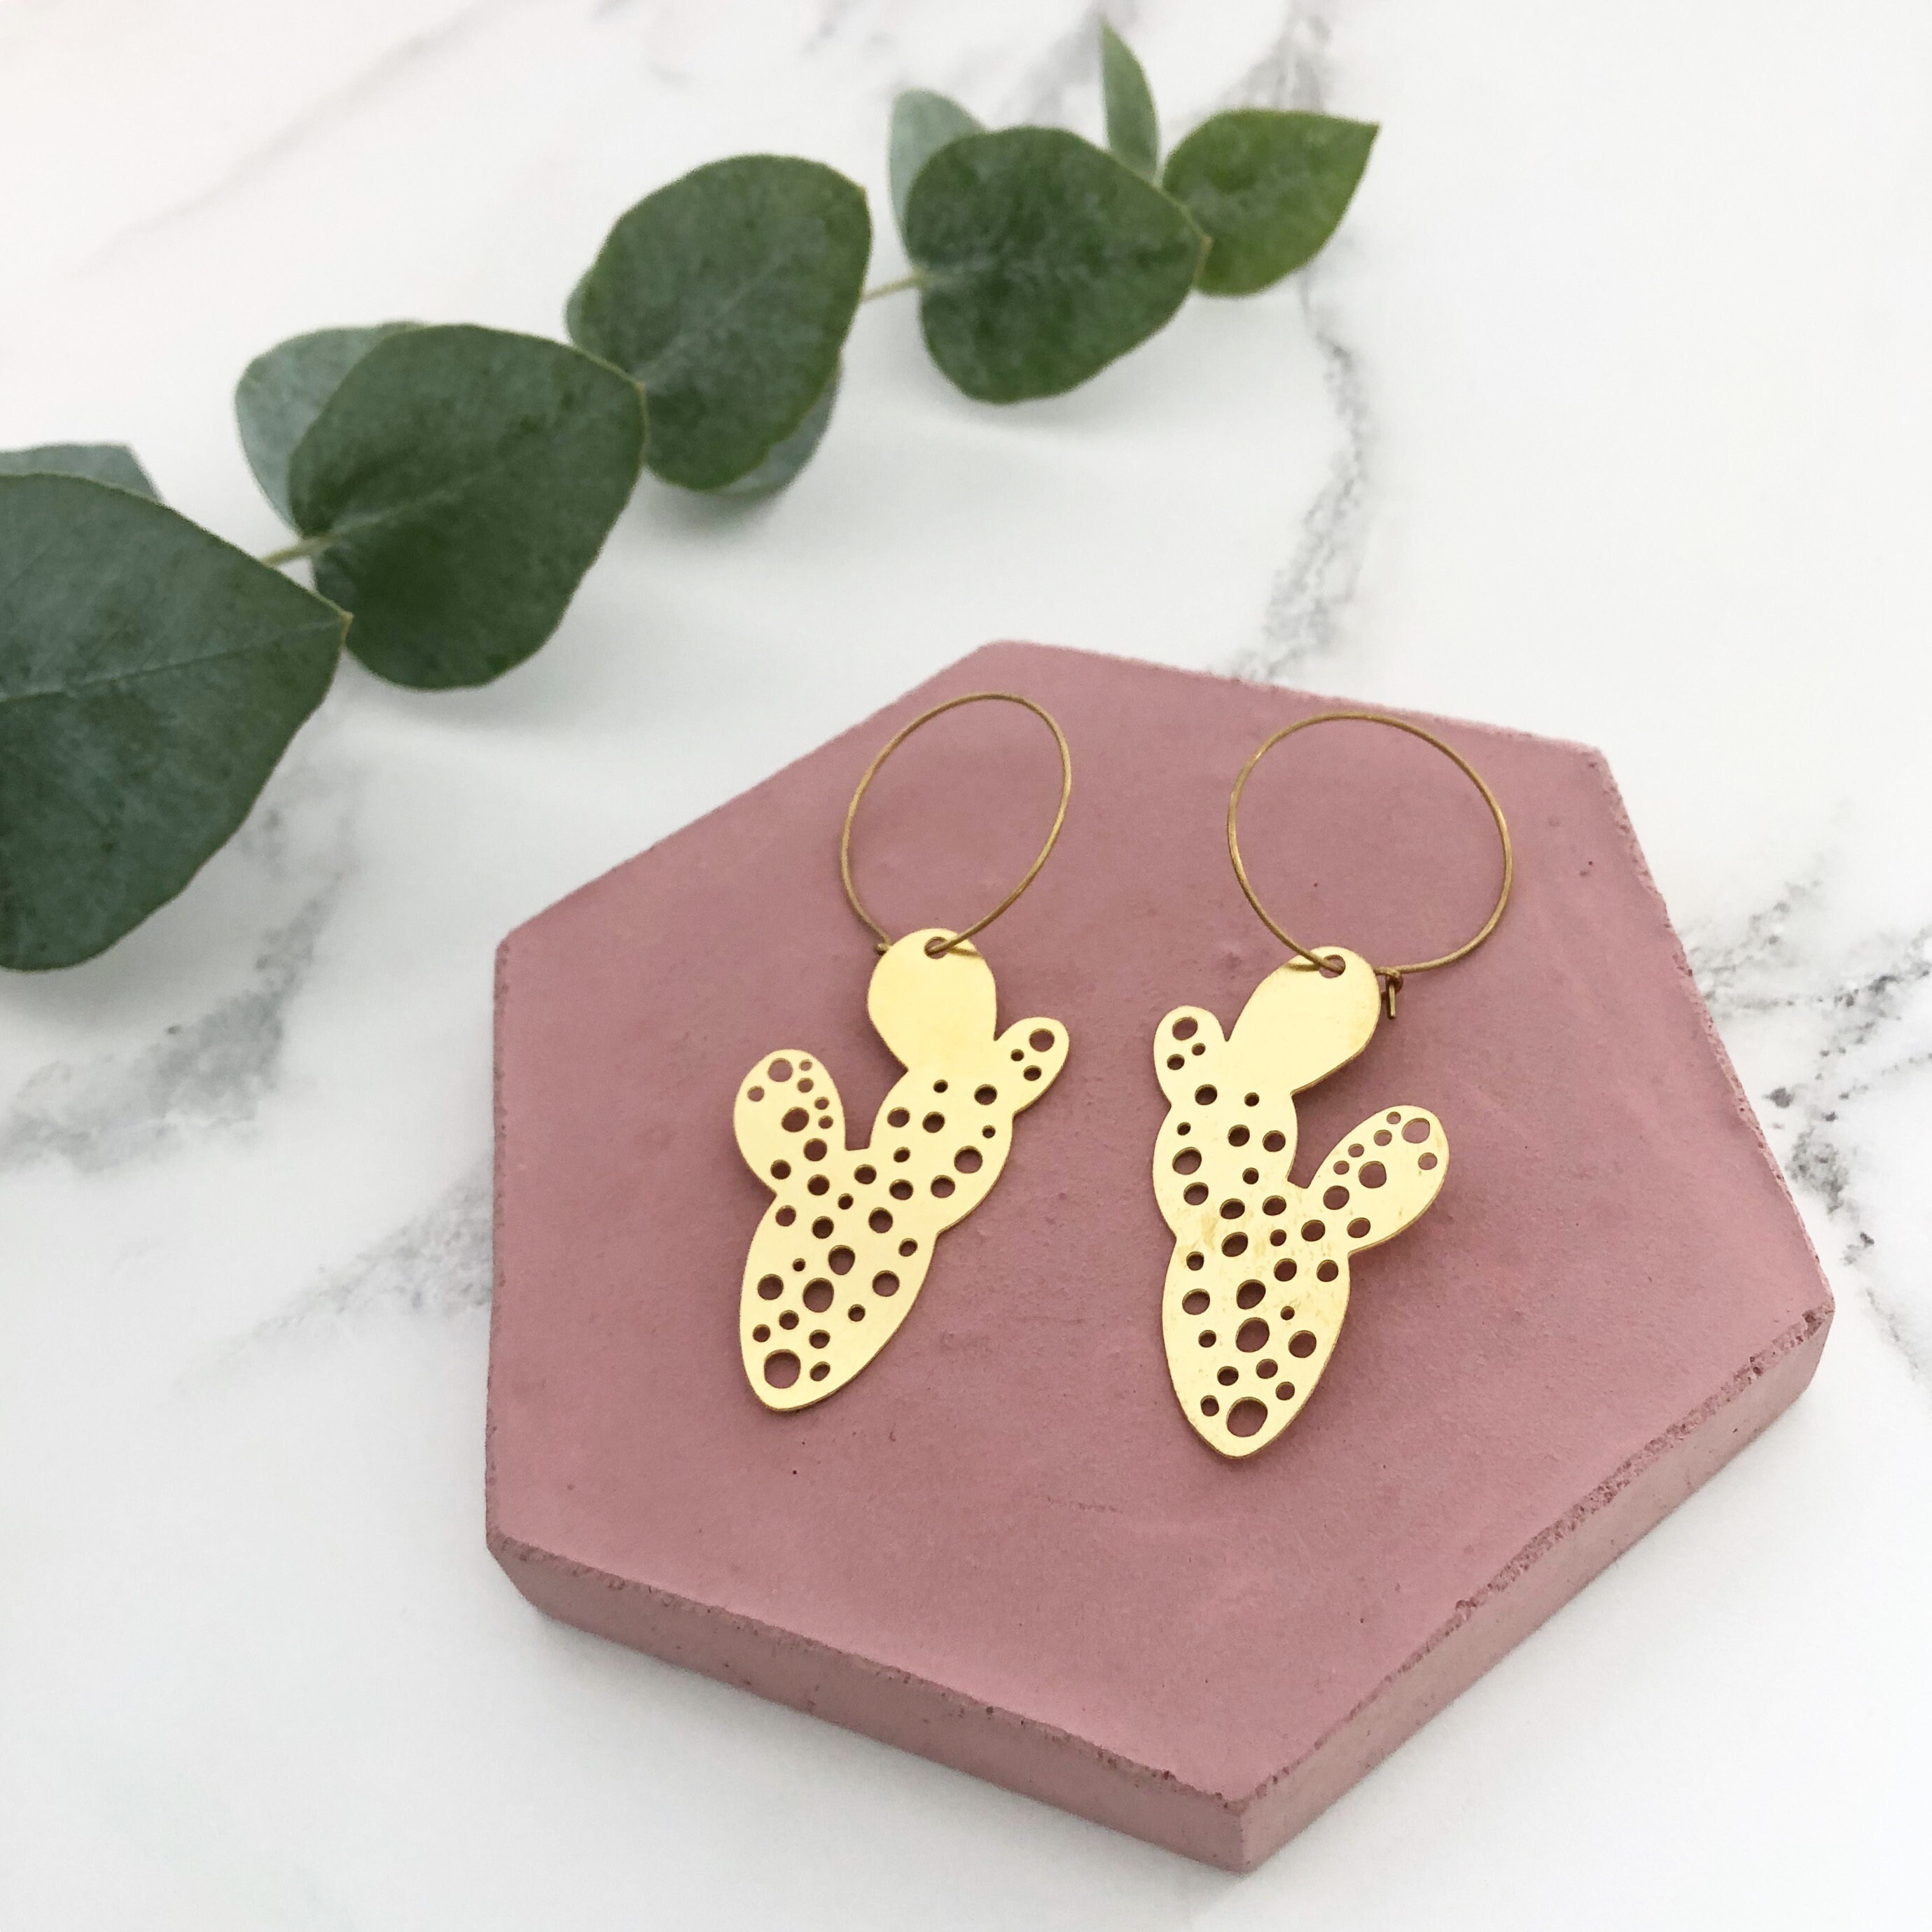 Gold Cactus Hoop Earrings - Jewellery Tropical House Plant Gift Fashion Accessory